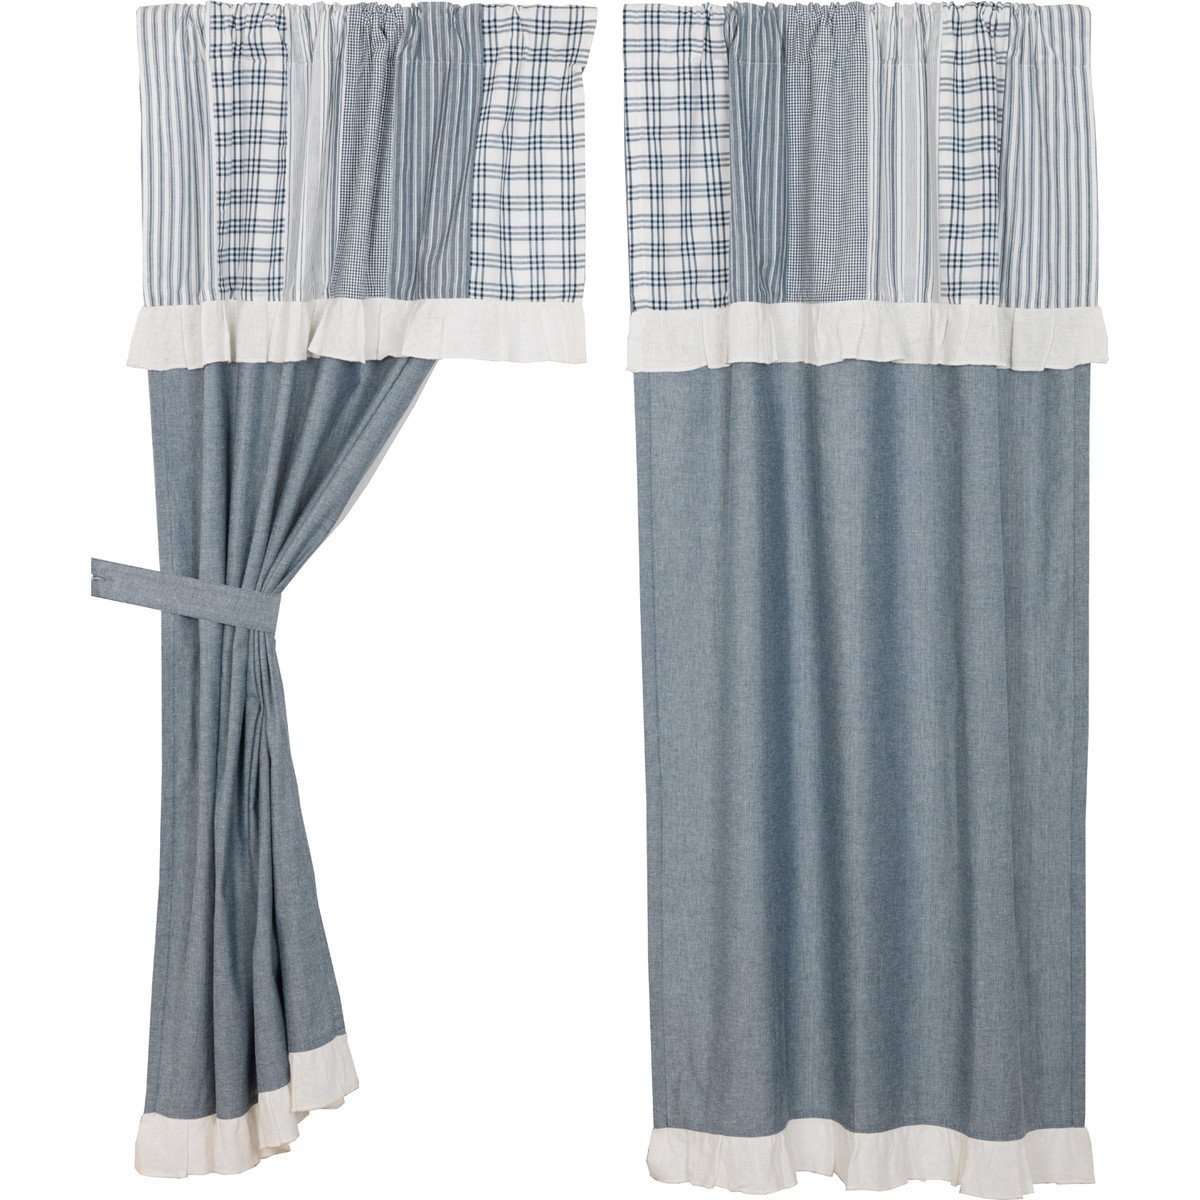 Sawyer Mill Blue Short Panel Curtain with Attached Patchwork Valance Set of 2 36"x63" - The Fox Decor